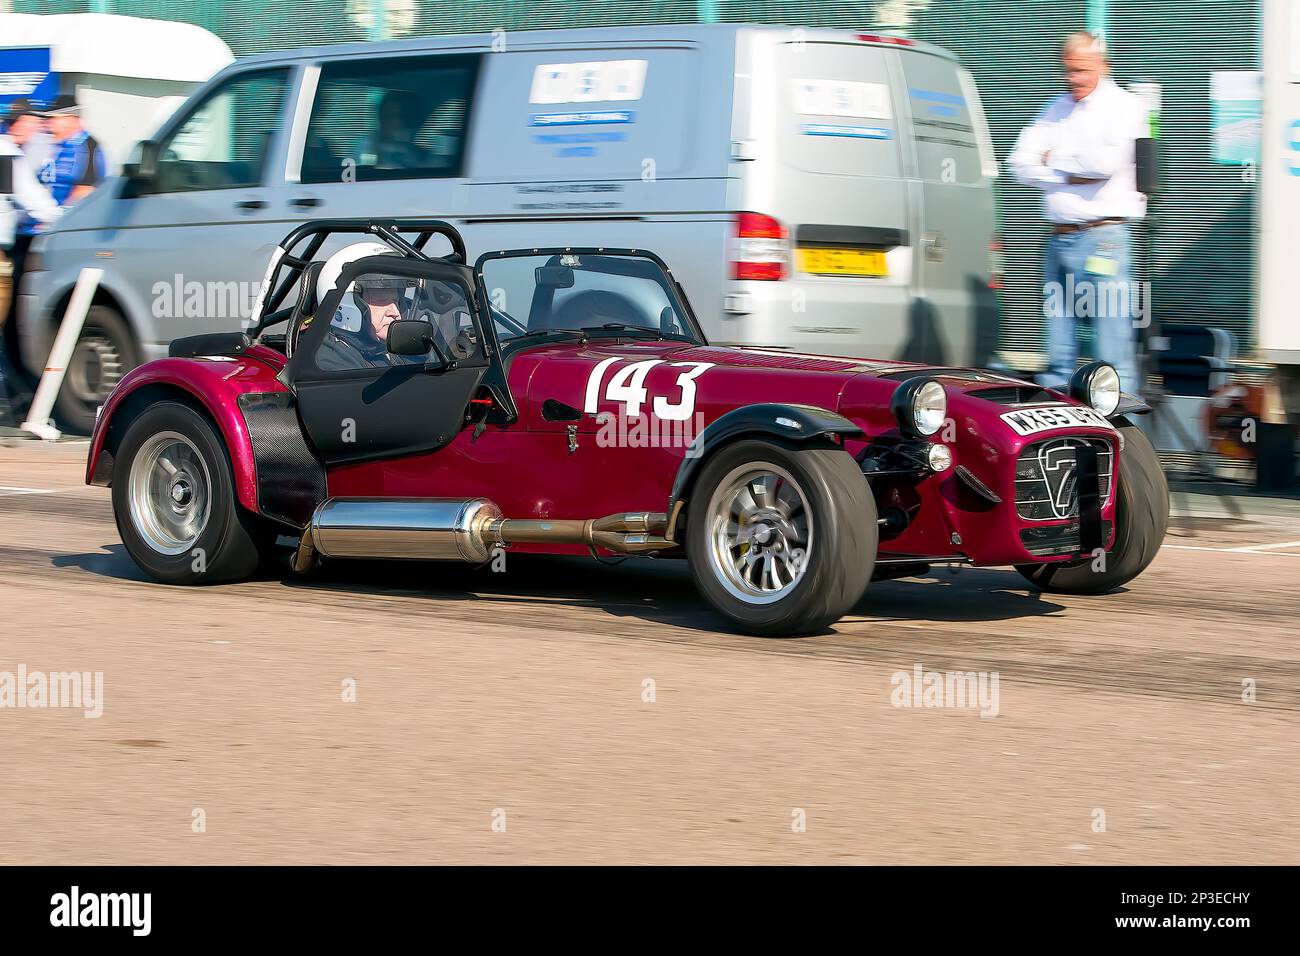 Roger Brunt driving a Caterham 620R at The Brighton National Speed Trials 2017. This is the oldest motor racing event in the UK and is held in the south east coastal town of Brighton. Madeira drive is a road which runs along the seafront and is normal full of people explorer the beach, pier and local attractions. Today it is turned in to a 1/4 time trial course. 2nd September 2017. Stock Photo